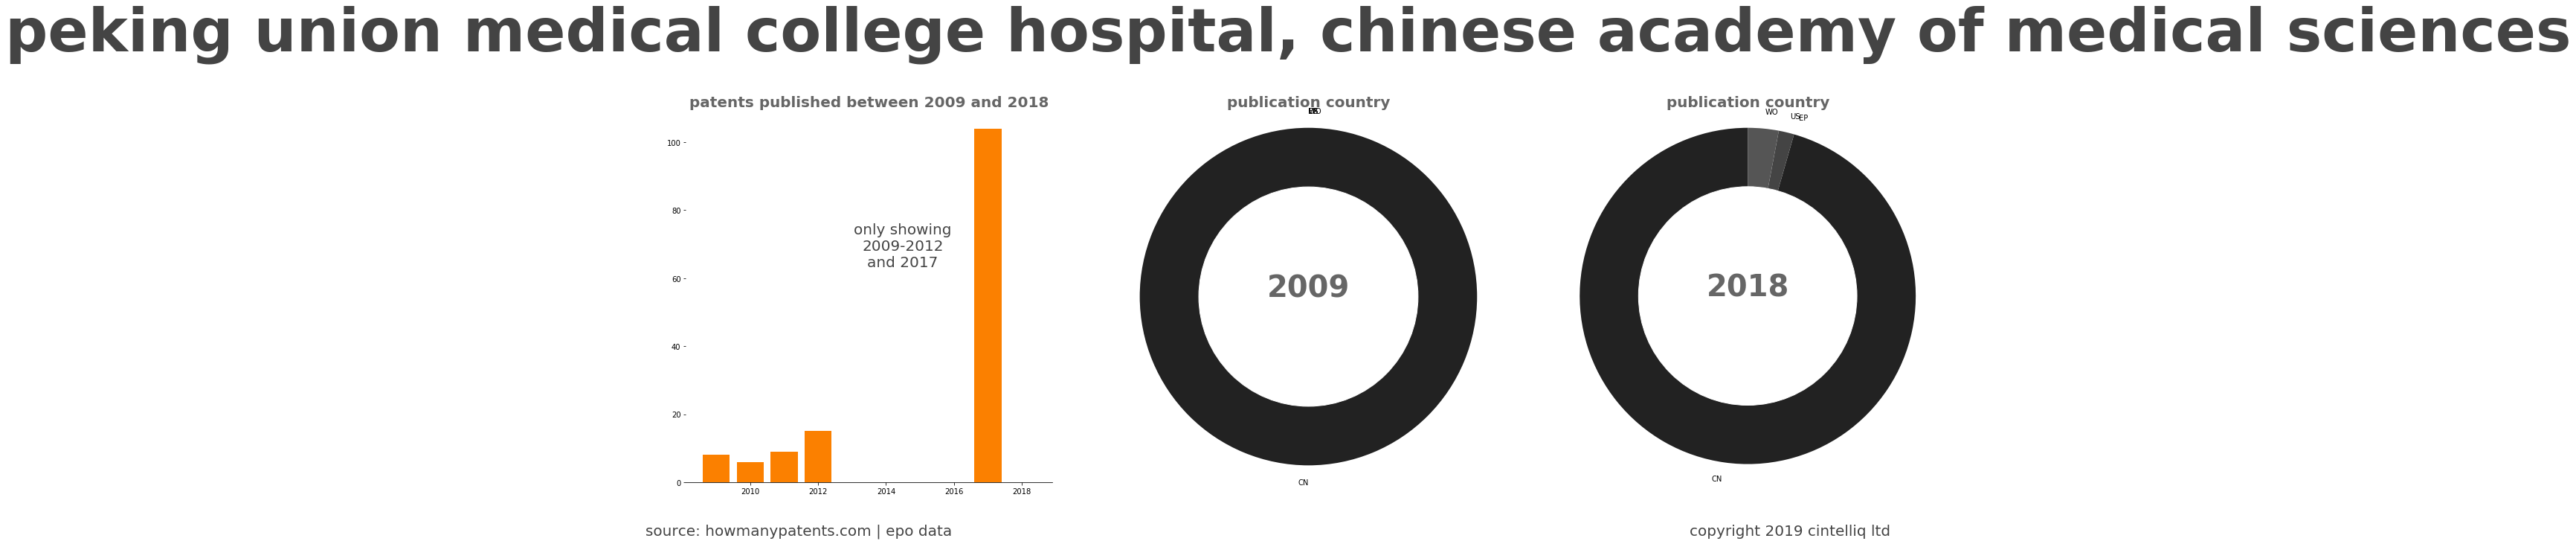 summary of patents for Peking Union Medical College Hospital, Chinese Academy Of Medical Sciences